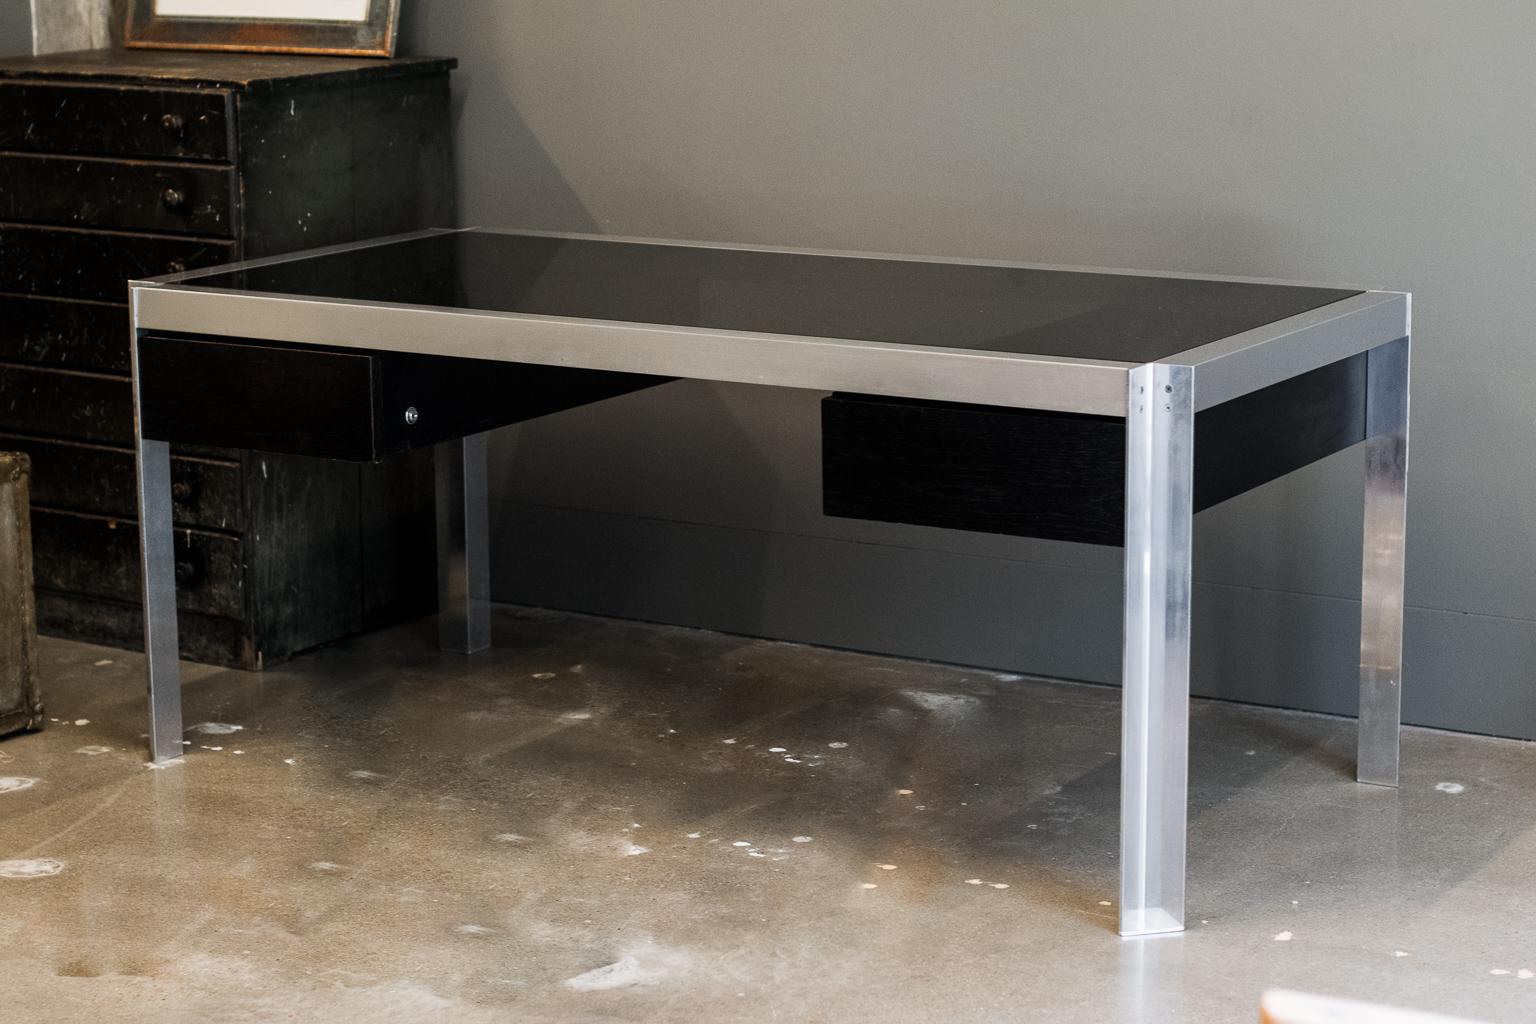 Inspired after meeting renowned architect and designer Le Corbusier, Georges Frydman founded his award-winning company E.F.A. in France in 1954. Executive desk with aluminum frame and dark stained wood drawer fronts, topped with smoked glass. France